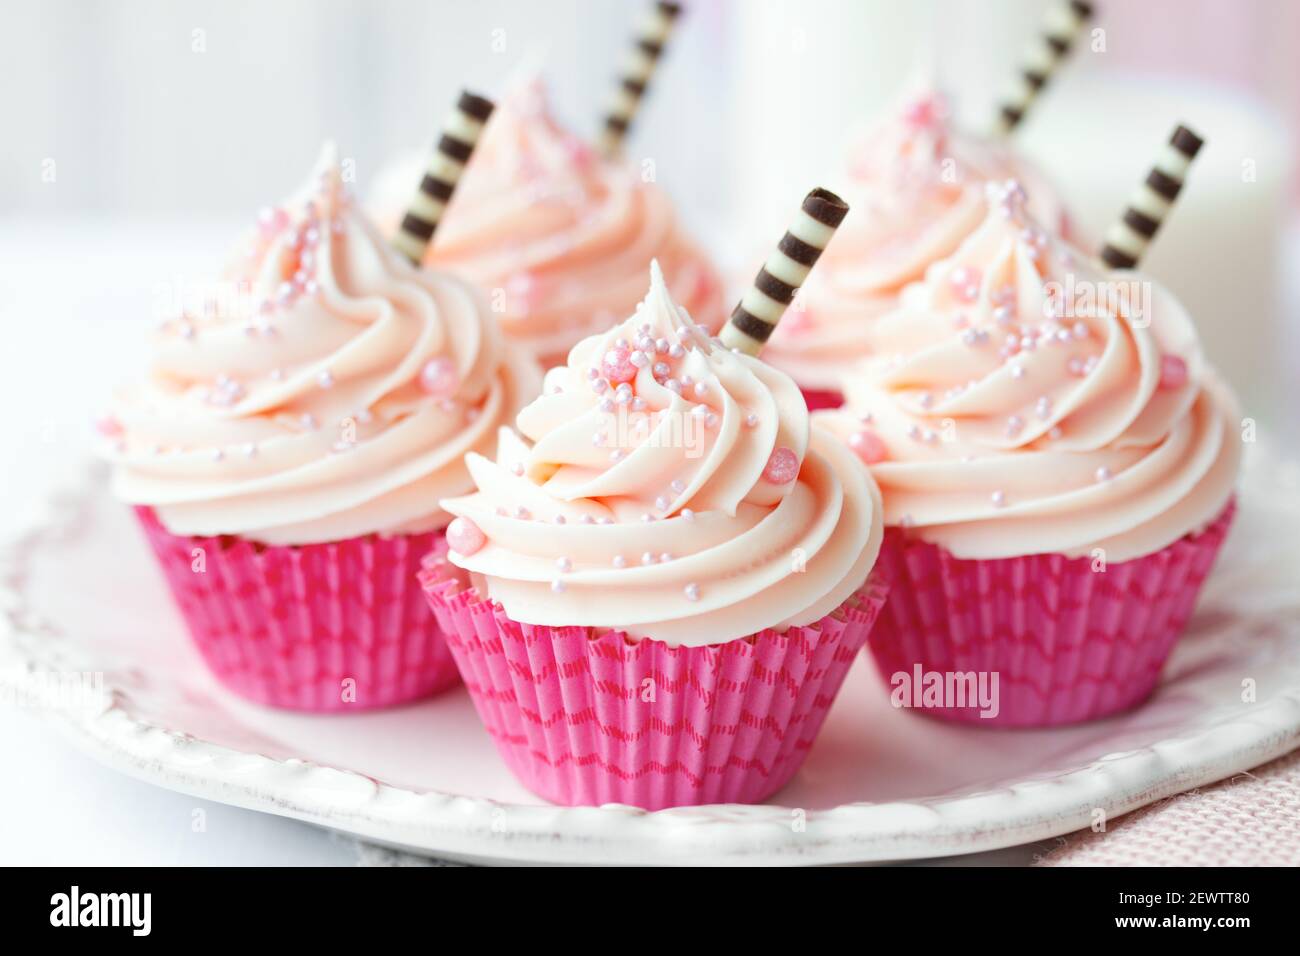 Pink cupcakes decorated with chocolate straws Stock Photo